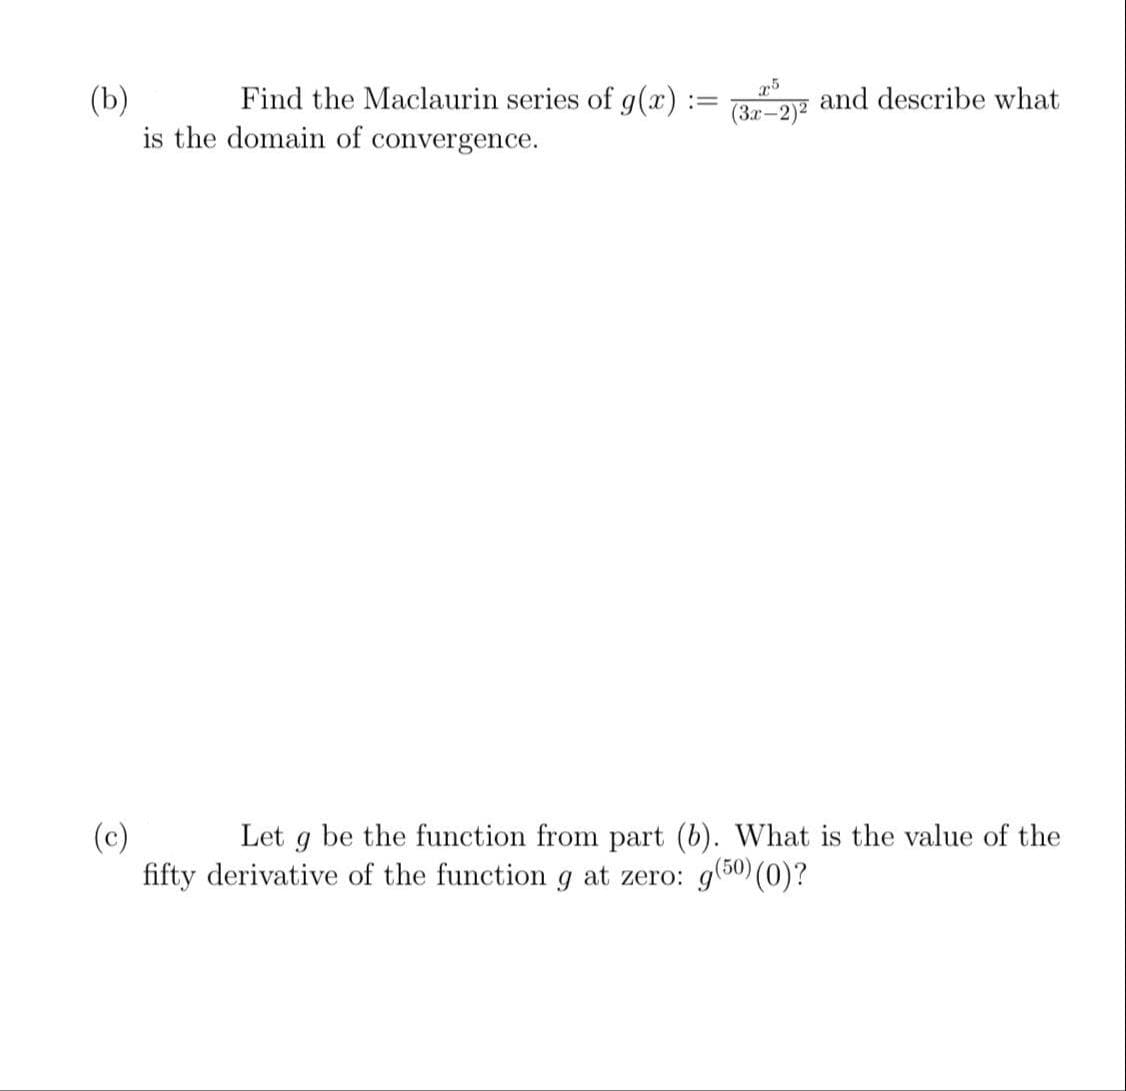 Find the Maclaurin series of g(x) :
(b)
is the domain of convergence.
and describe what
(3x-2)2
Let g be the function from part (b). What is the value of the
(c)
fifty derivative of the function g at zero: g(50) (0)?
